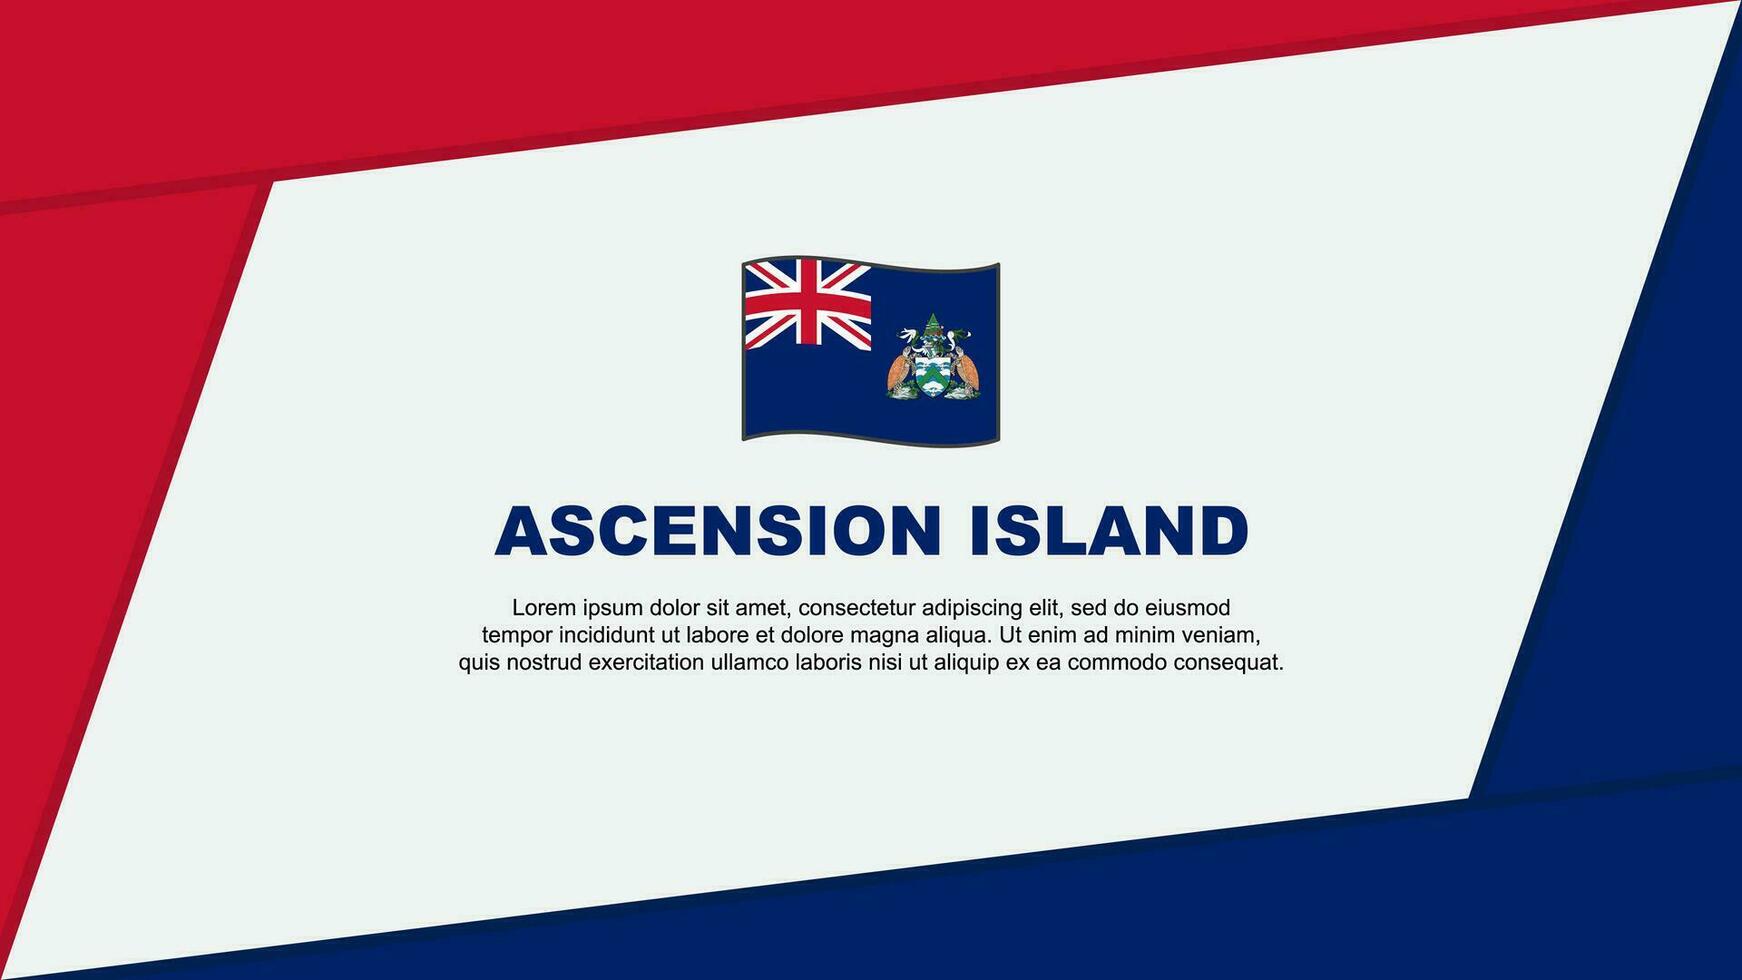 Ascension Island Flag Abstract Background Design Template. Ascension Island Independence Day Banner Cartoon Vector Illustration. Ascension Island Banner